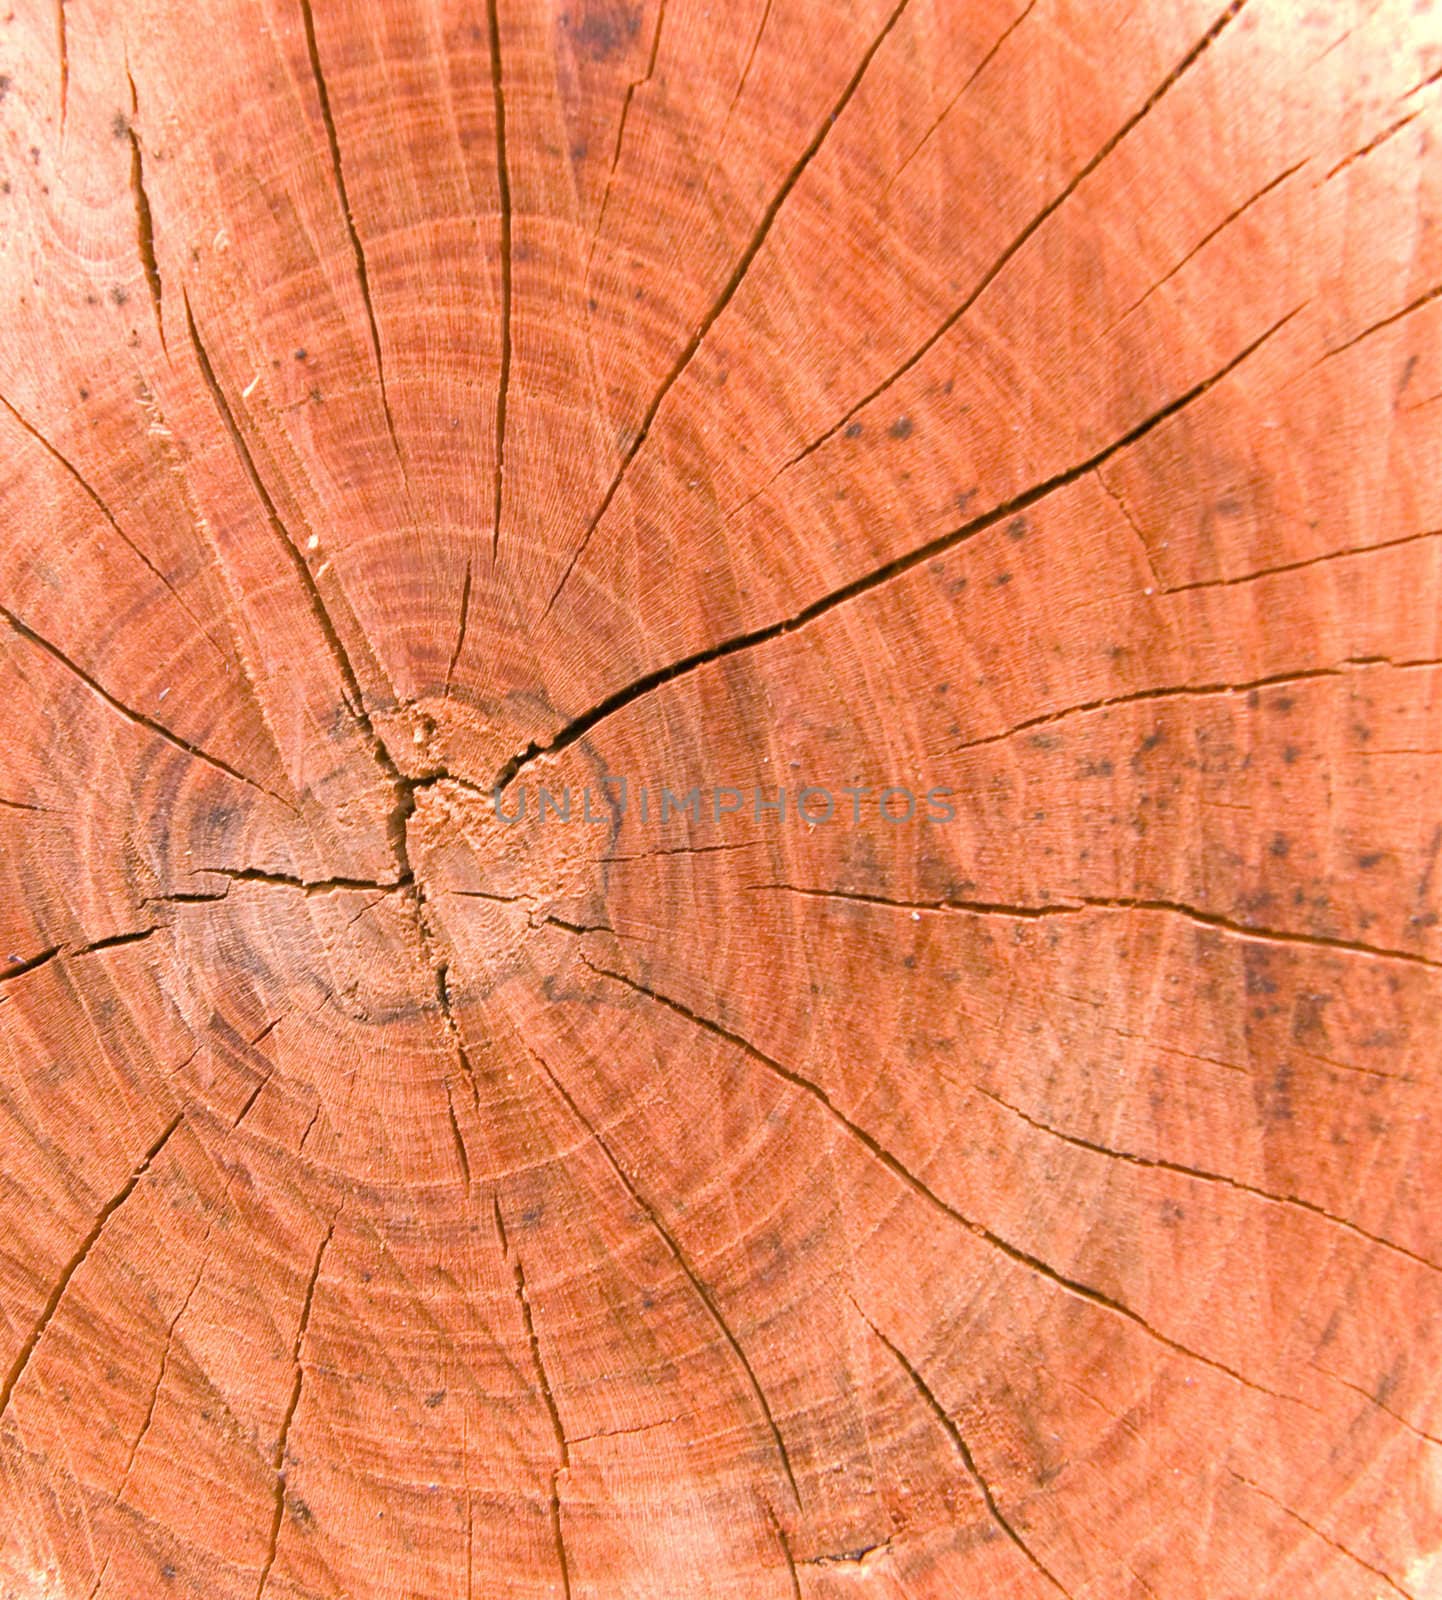 Tree rings are counted to determine the age of a tree